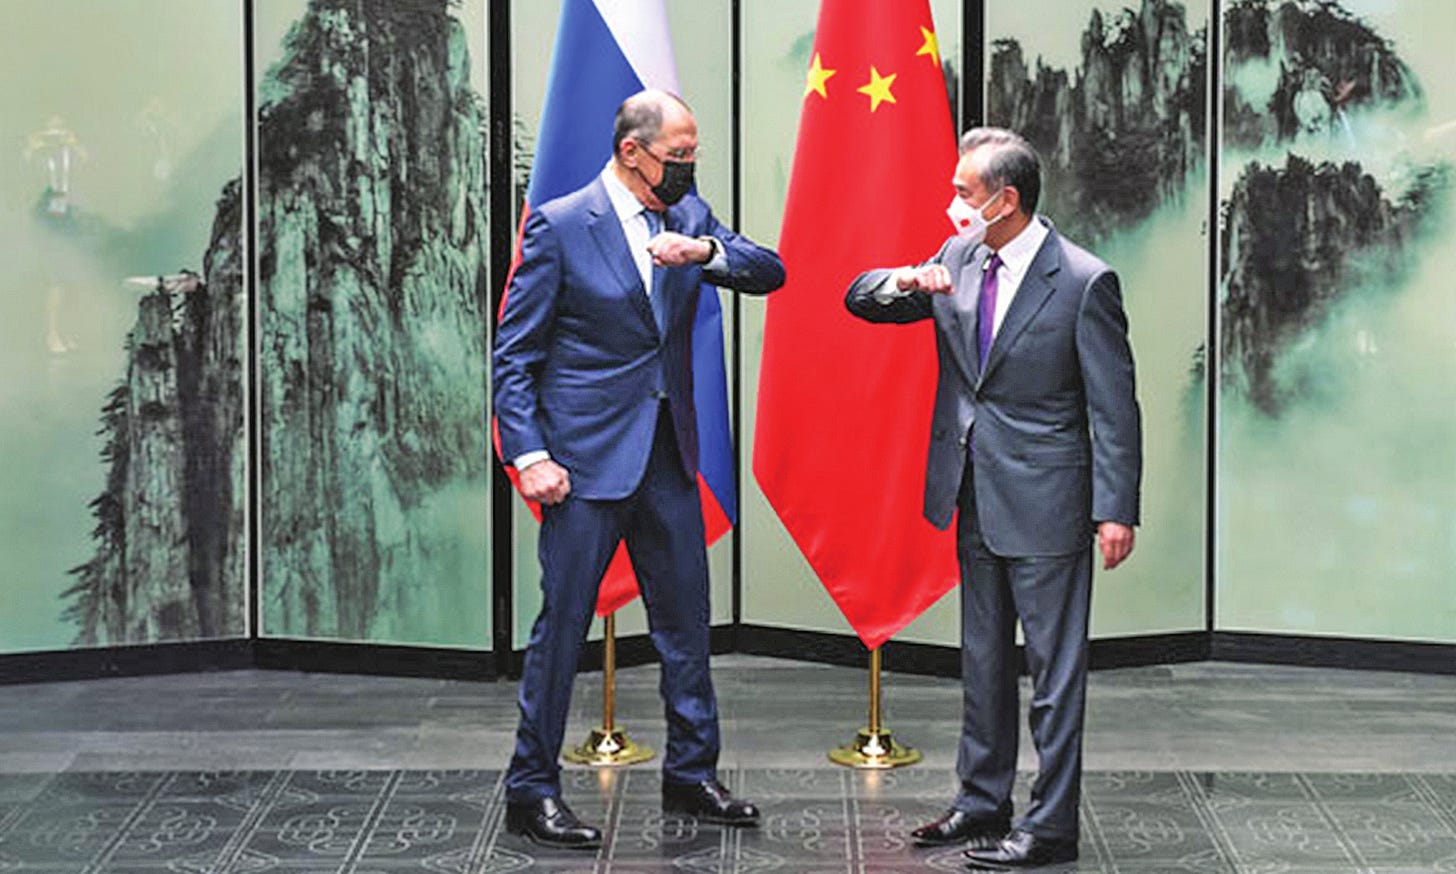 Wang meets Lavrov in China, hails ties as withstanding test of changing  intl situation - Global Times